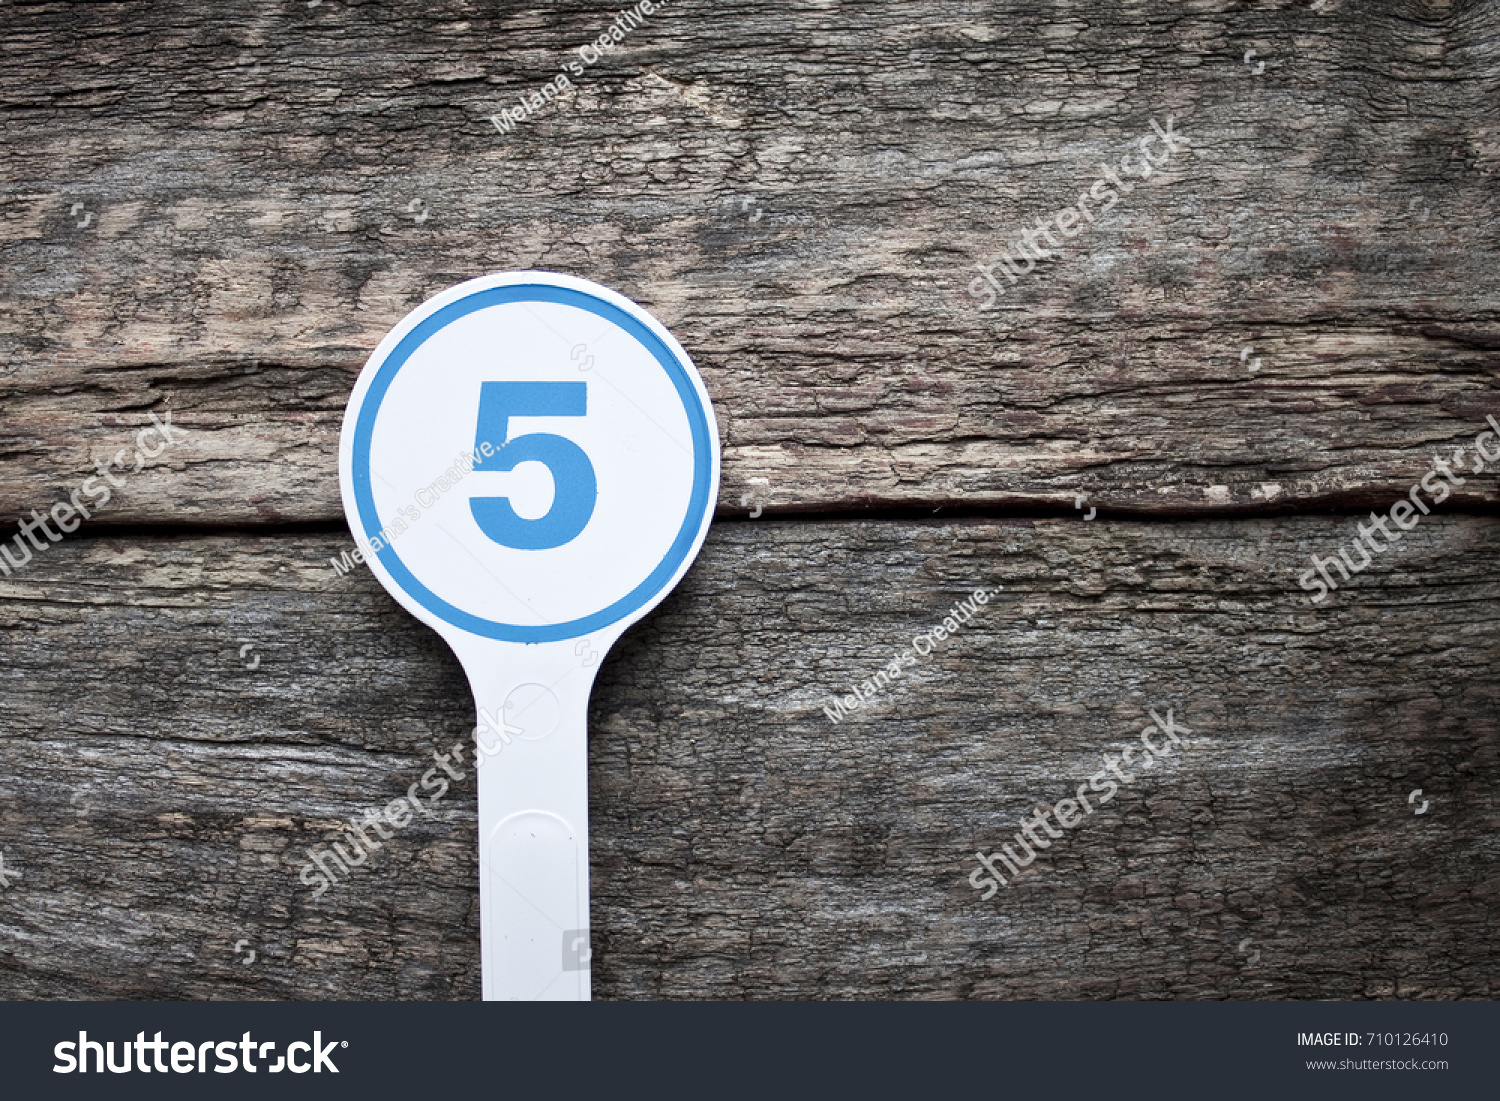 Plate number on a old wooden background. Numbers for lists or numbering concept.  #710126410